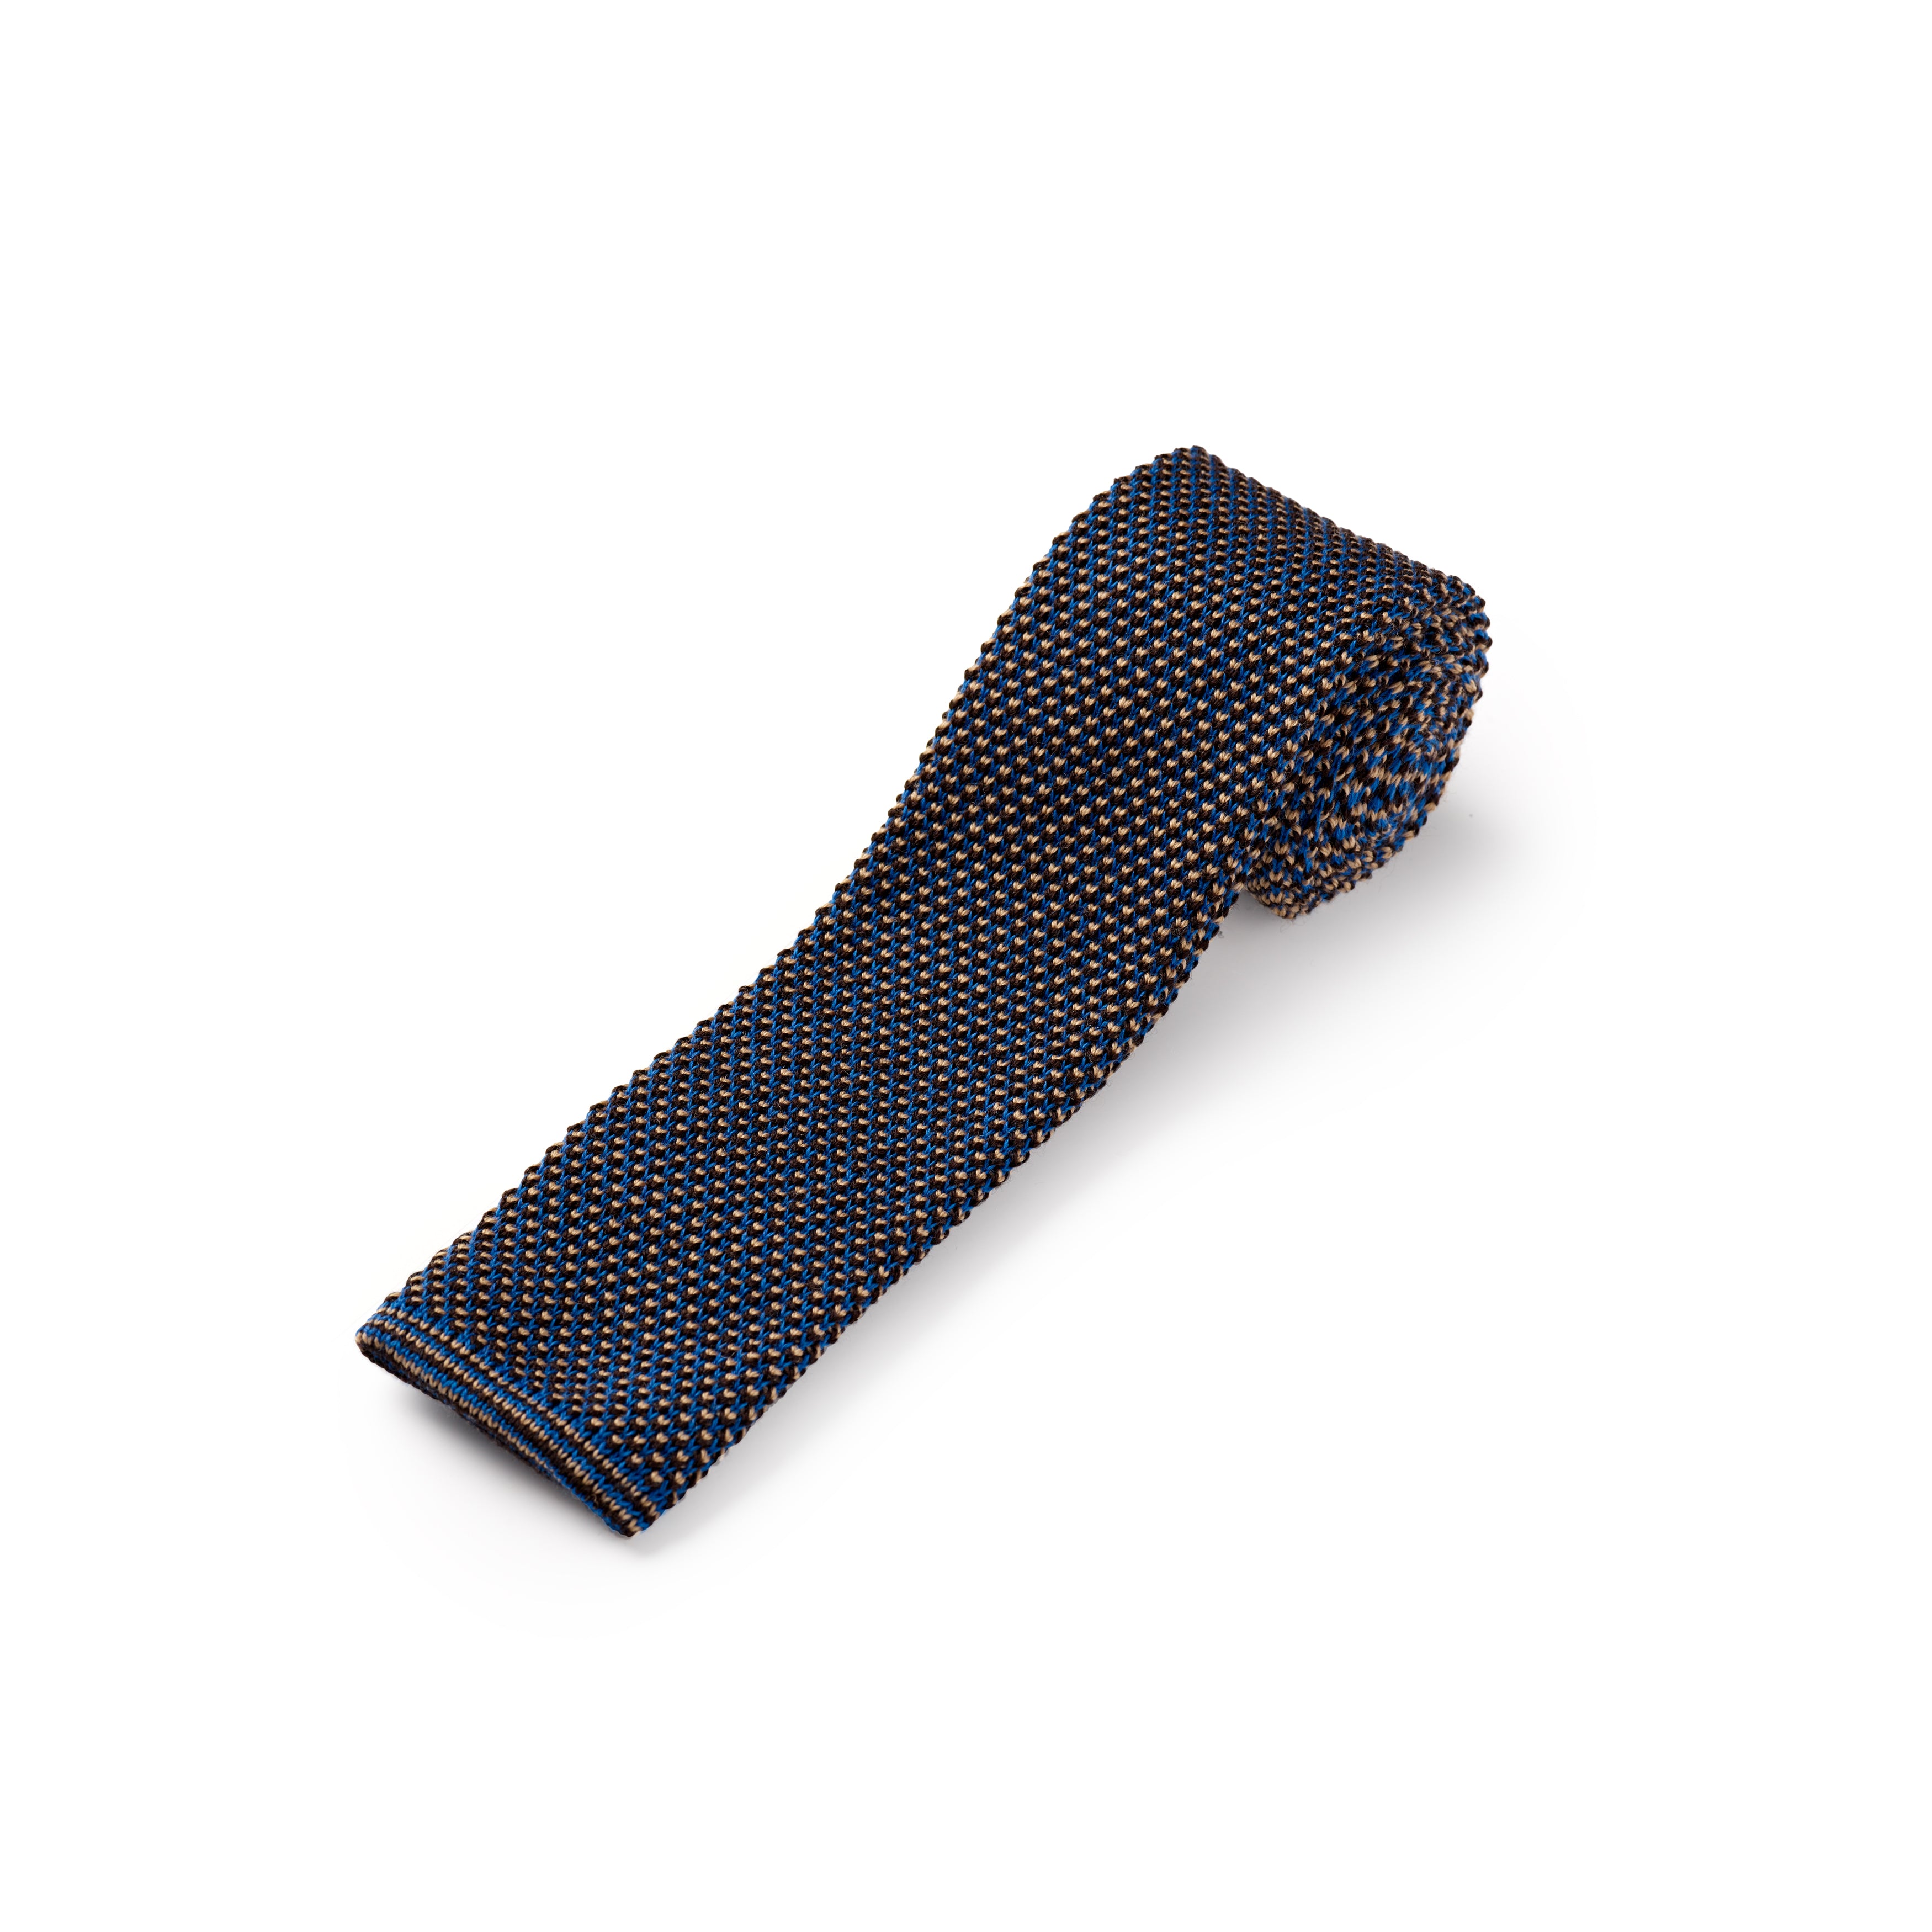 Azure Blue, Cappuccino and Chocolate Brown Spotty Wool Knitted Tie